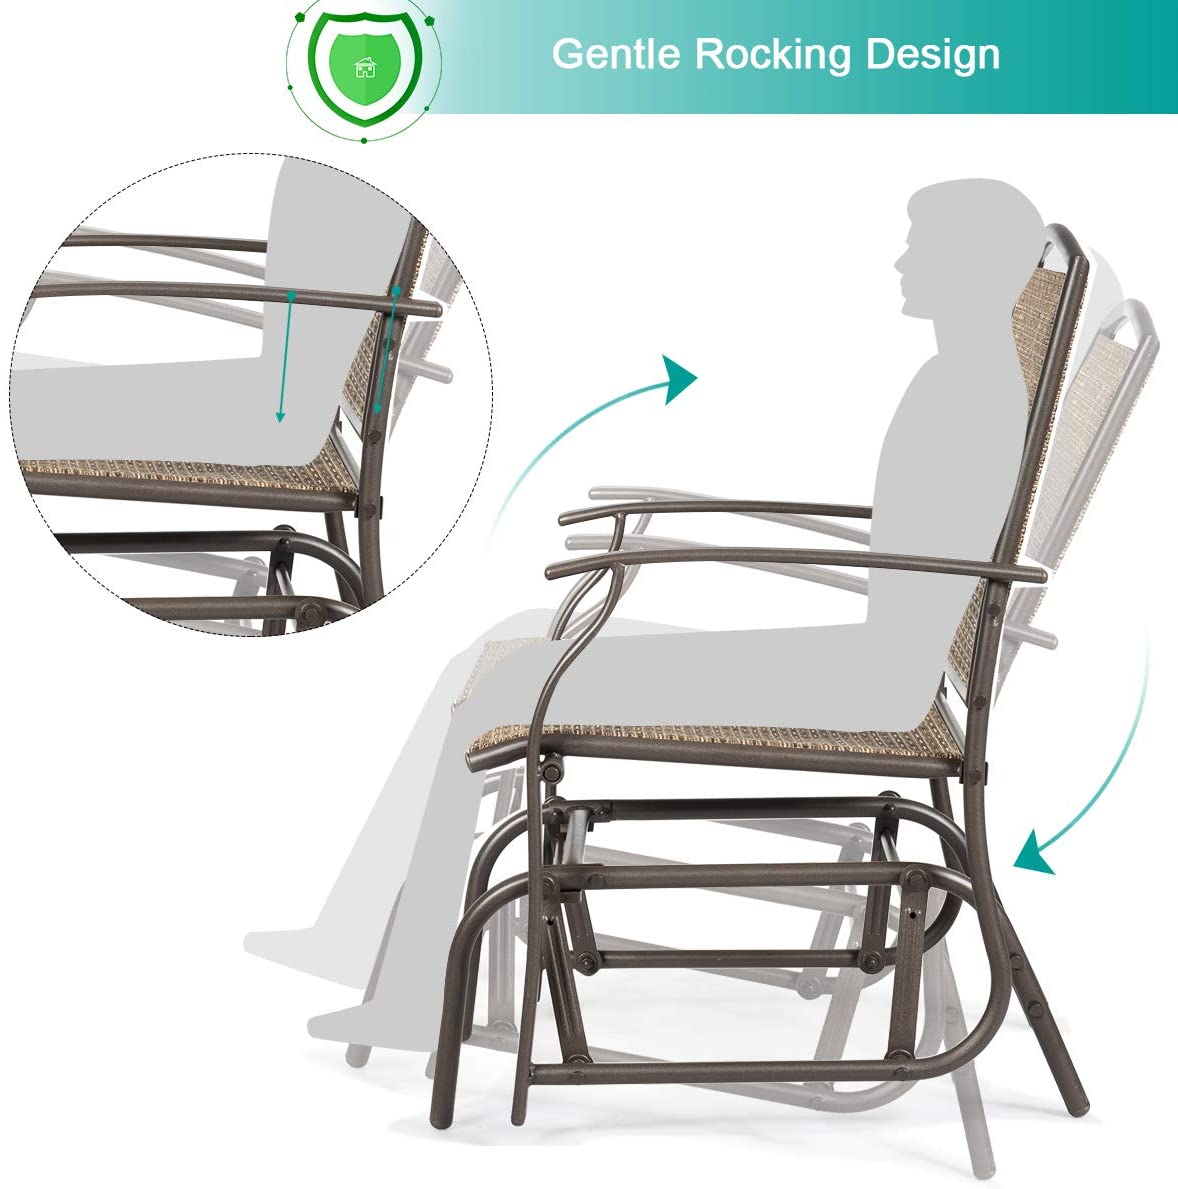 Outdoor Glider Chair W/Sturdy Metal Frame & Breathable Mesh Fabric, Porch Lounge Swing Rocking Chair for Lawn, Garden, Porch, Backyard, Poolside, Patio Glider - image 5 of 9